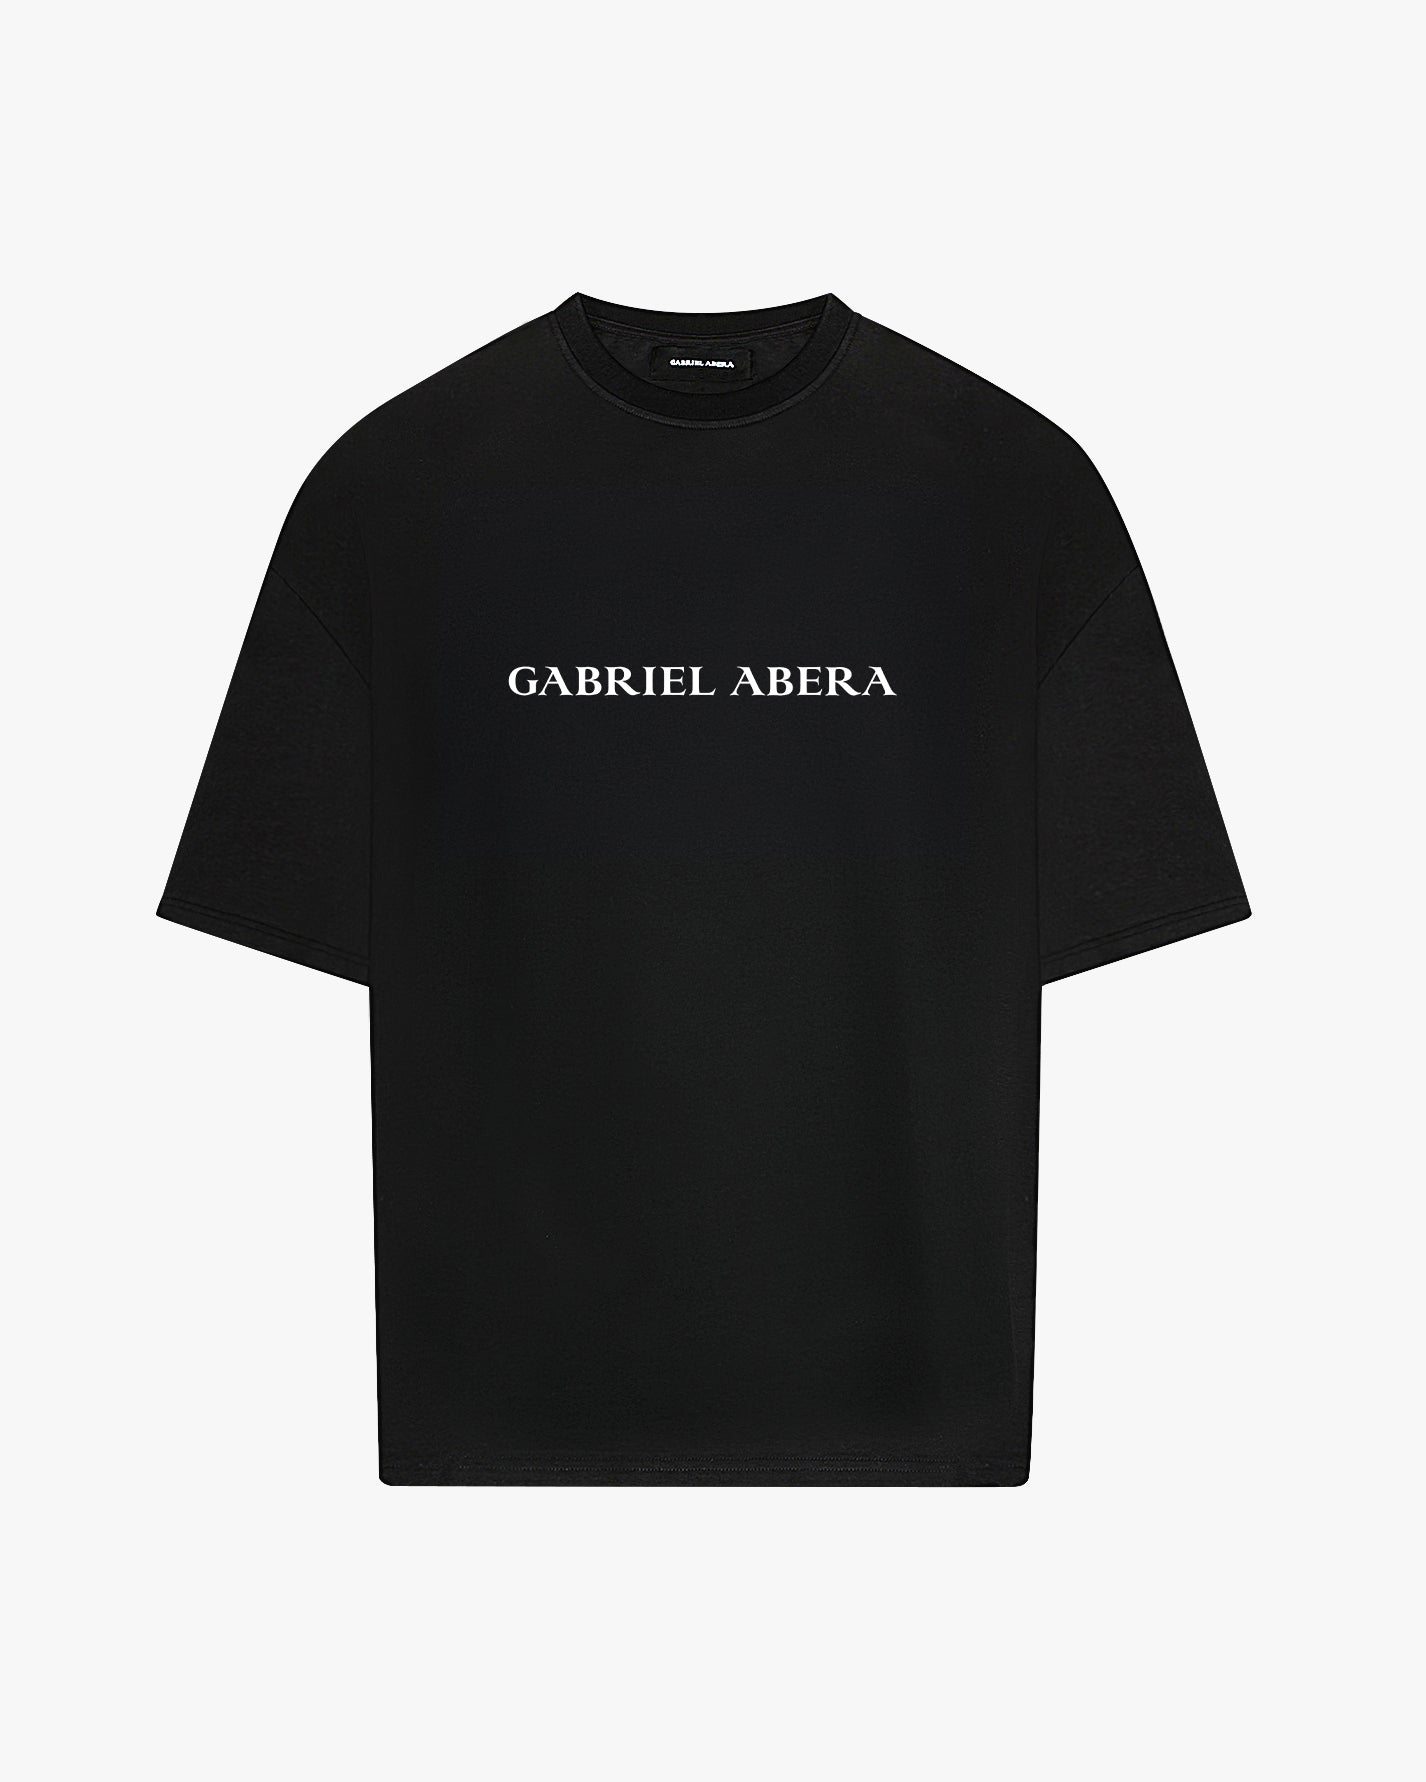 black oversize t shirt with white brand name print